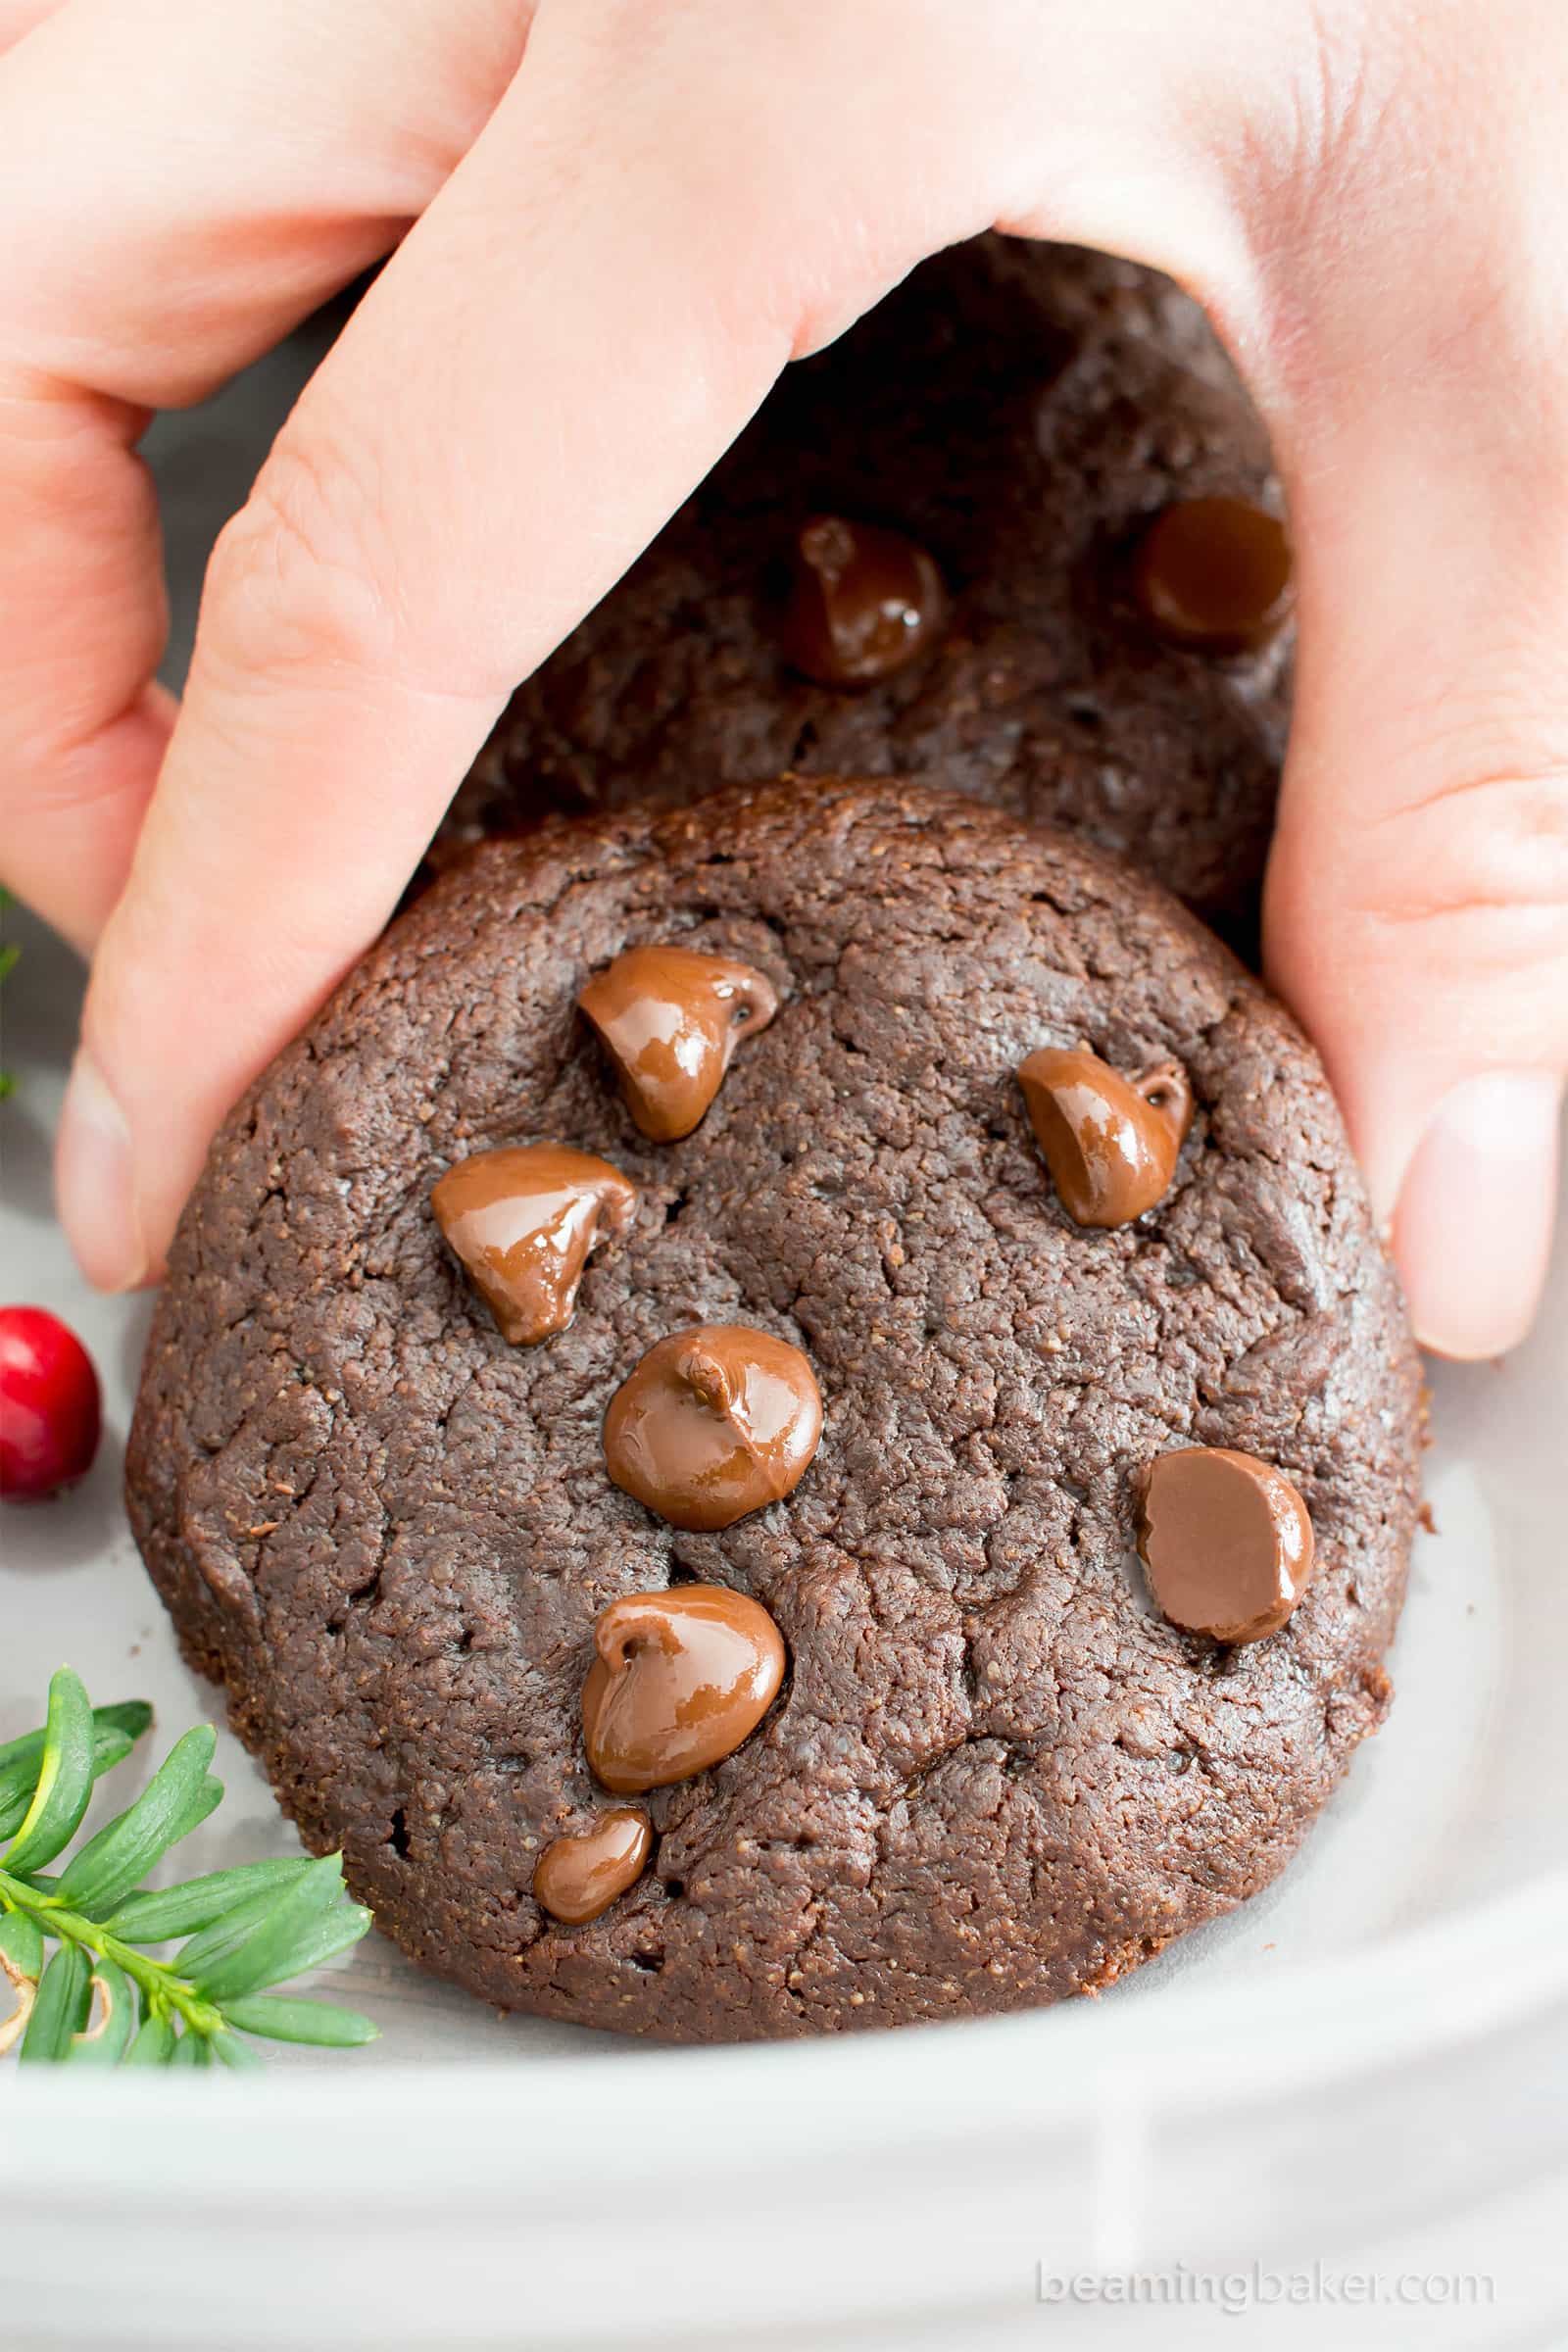 Gluten Free Peppermint Brownie Cookies Recipe (V, GF): a one bowl recipe for soft, decadent and fudgy brownie cookies (aka brookies) bursting with cool peppermint flavor and melted chocolate chips. #Vegan #GlutenFree #DairyFree #HealthyDessert #Holiday #Christmas | Recipe on BeamingBaker.com